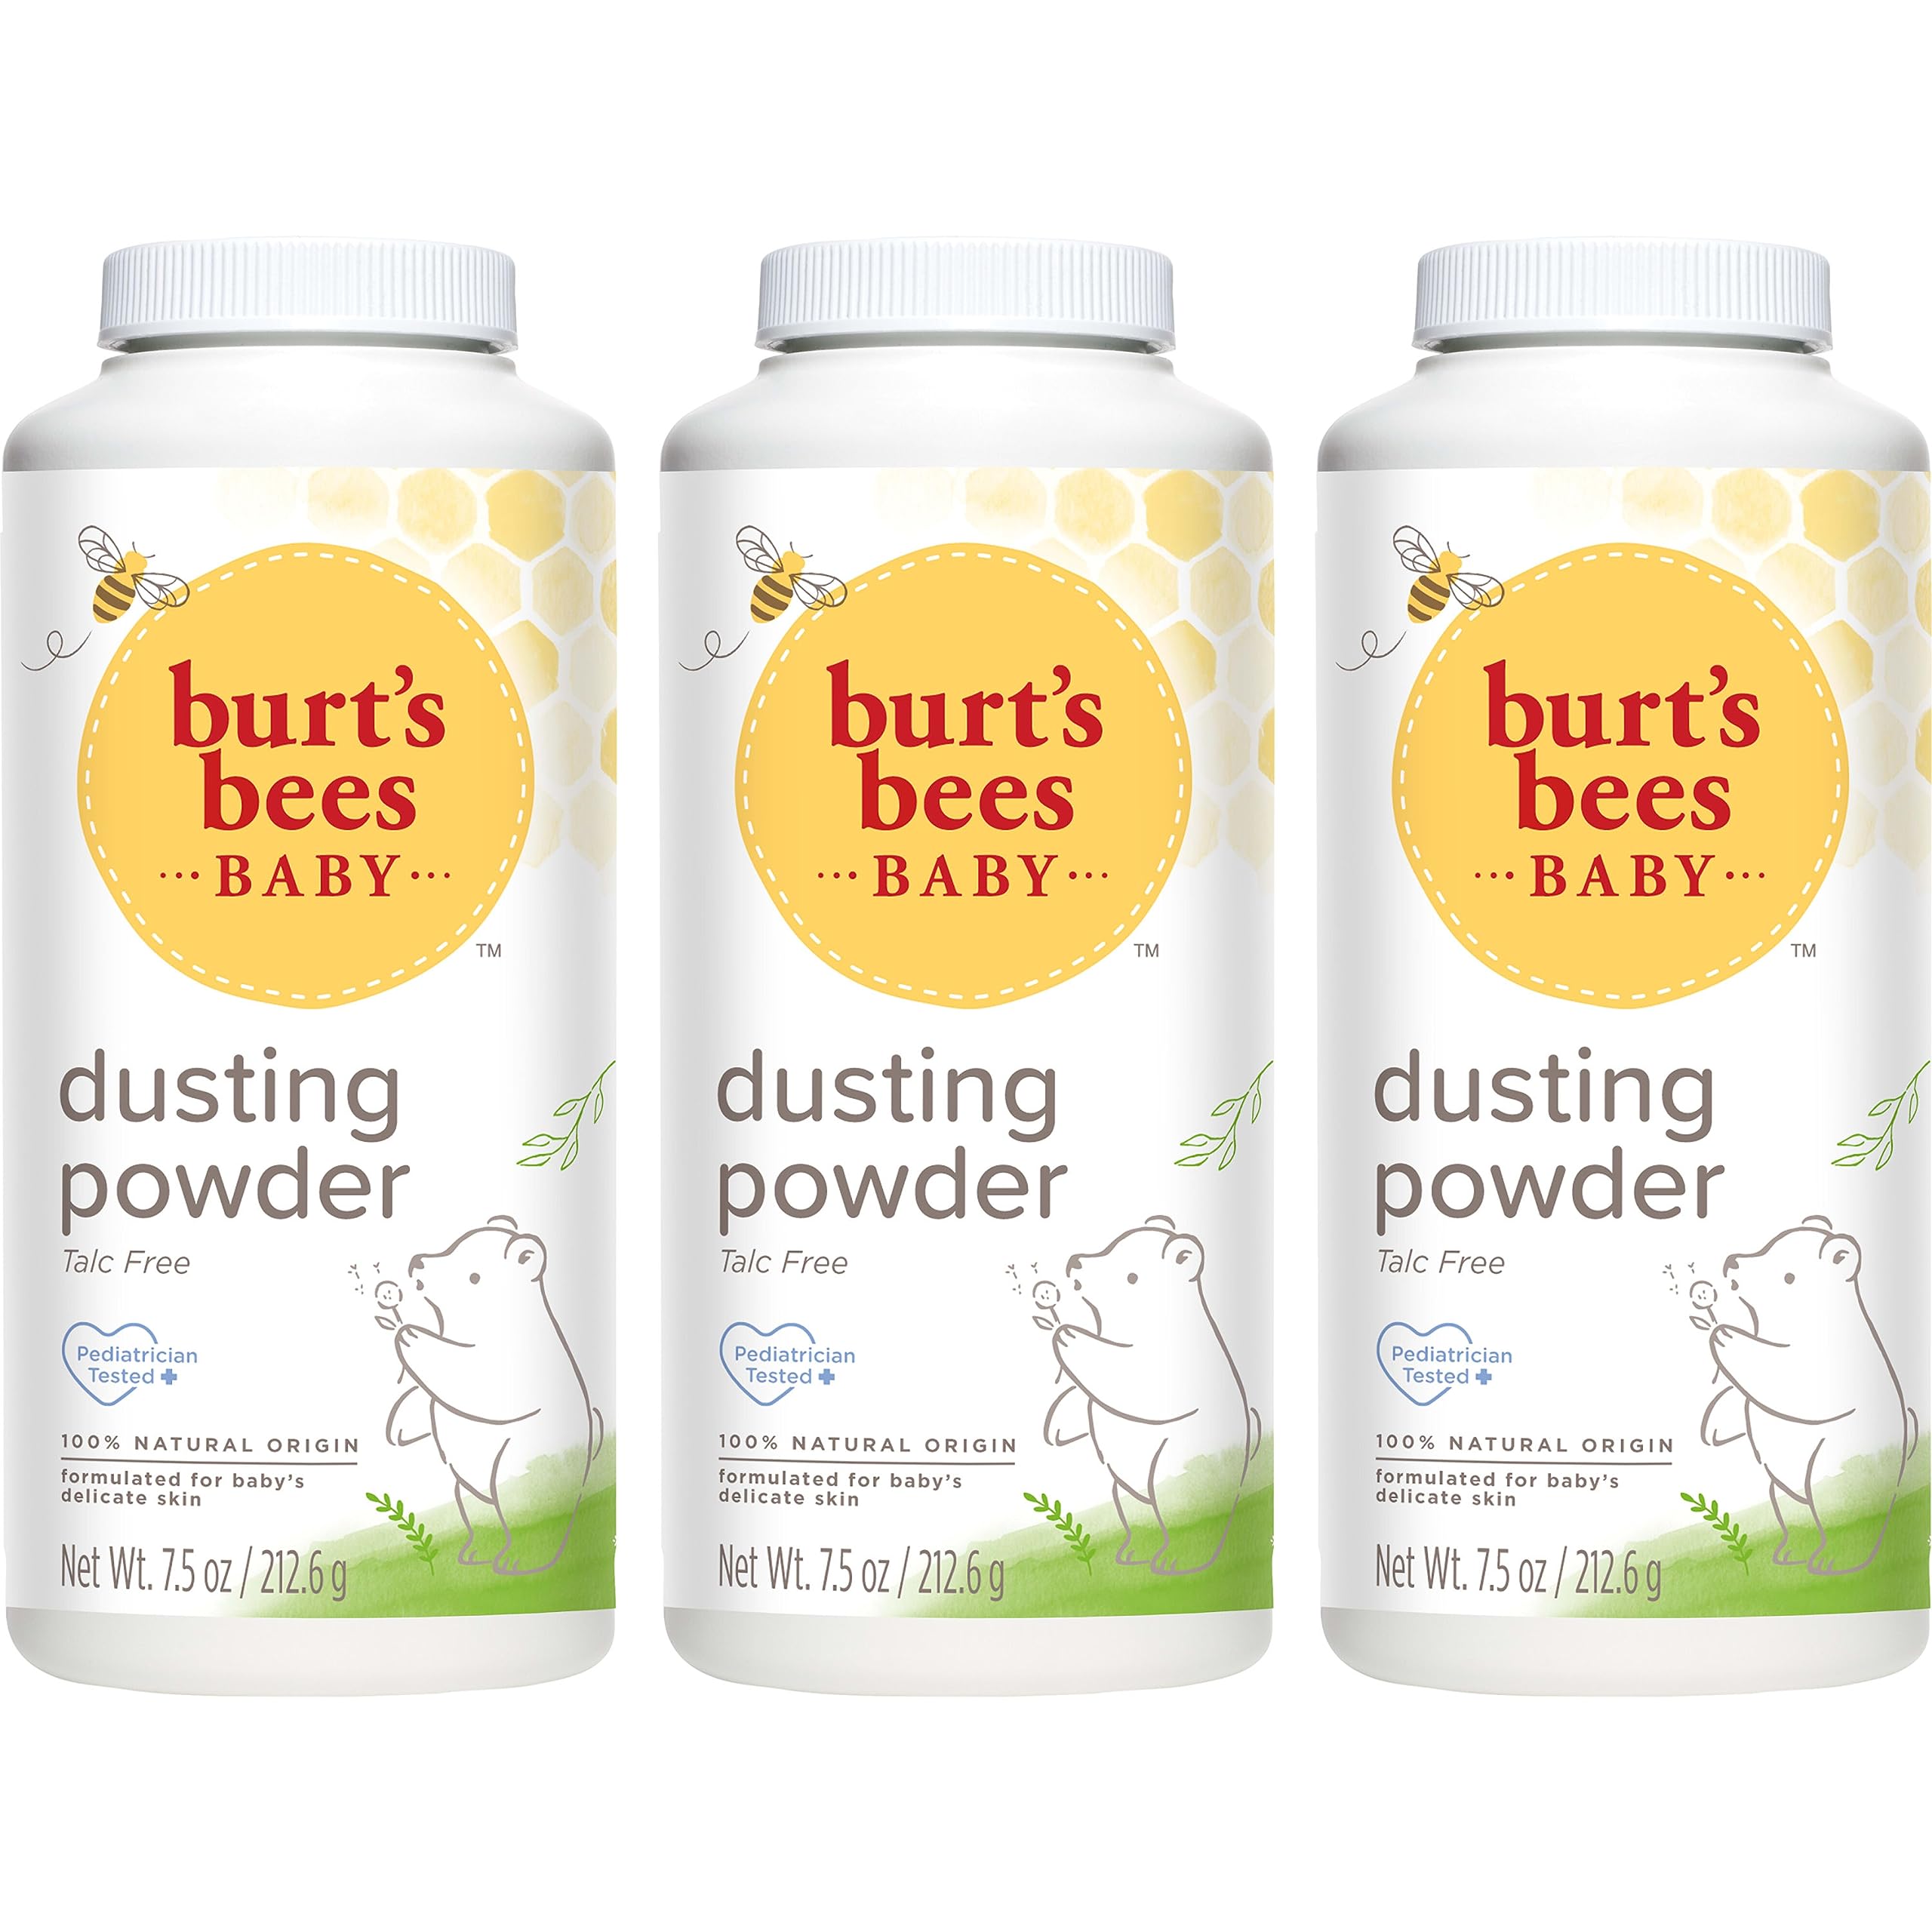 Burt's Bees Baby Dusting Powder, 100% Natural Origin, Talc-Free, Pediatrician Tested, 7.5 Ounces, Pack of 3, Pack May Vary